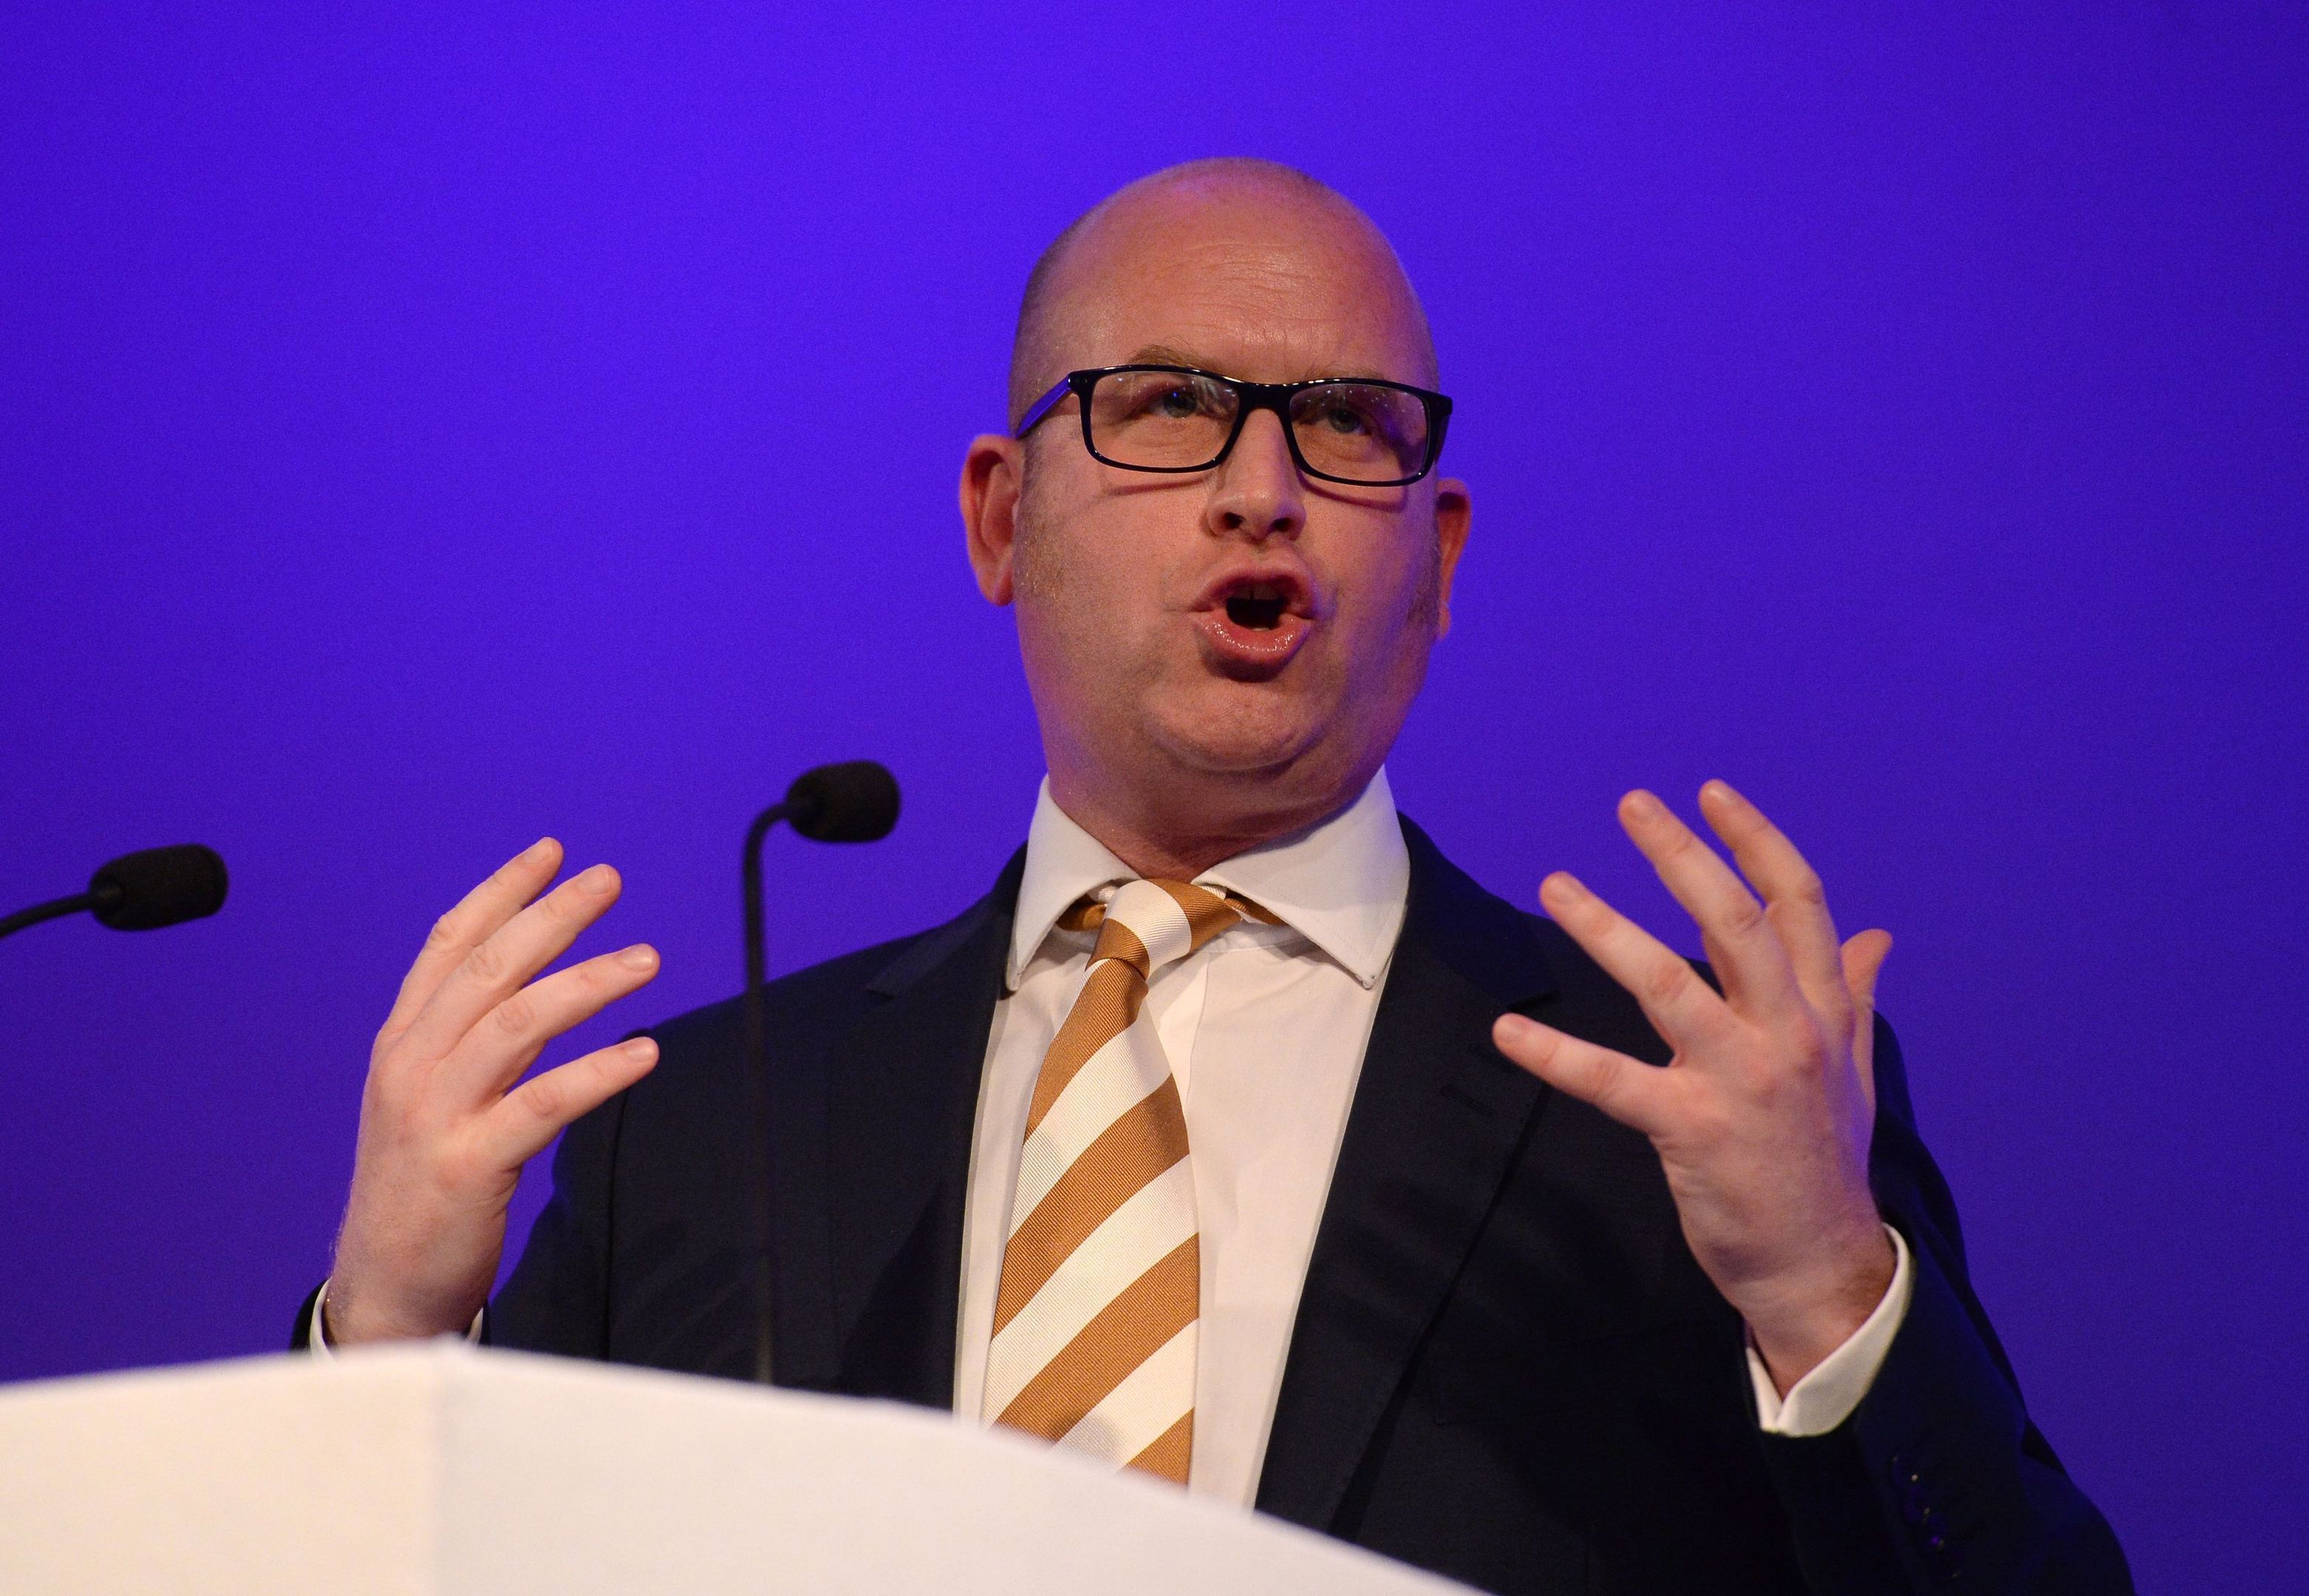 Ruth Davidson said Ukip leader Paul Nutall and his party need to "grow up".